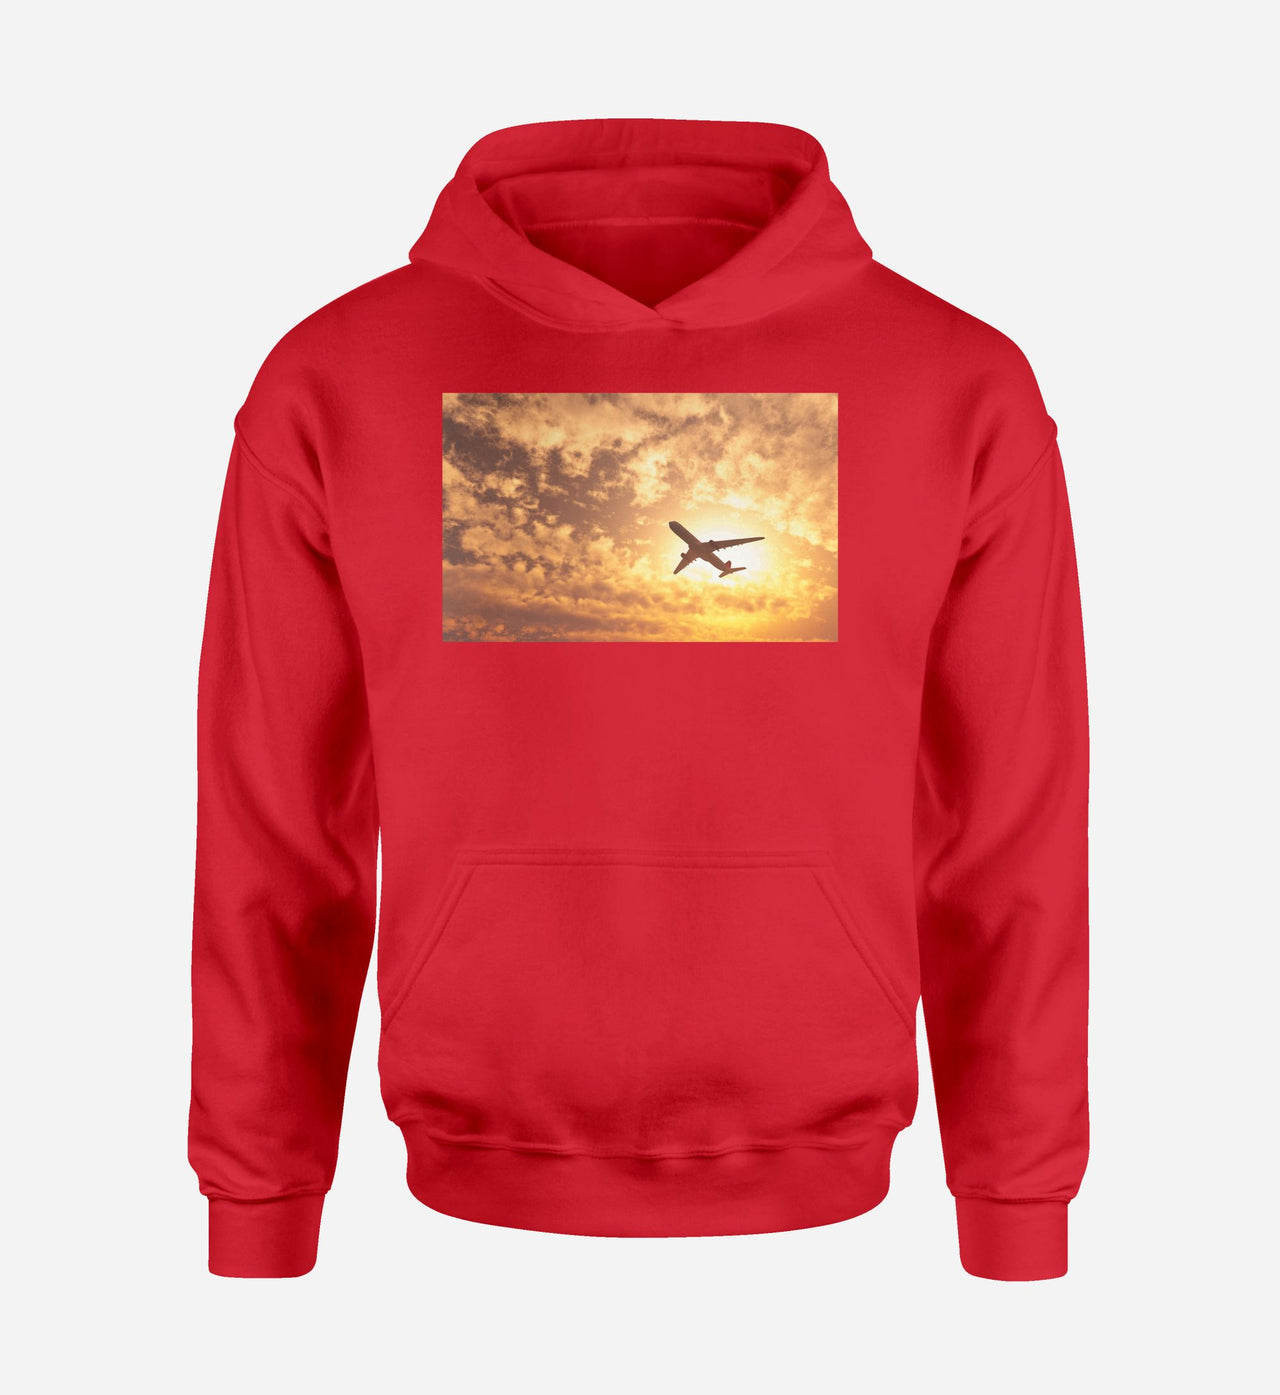 Plane Passing By Designed Hoodies